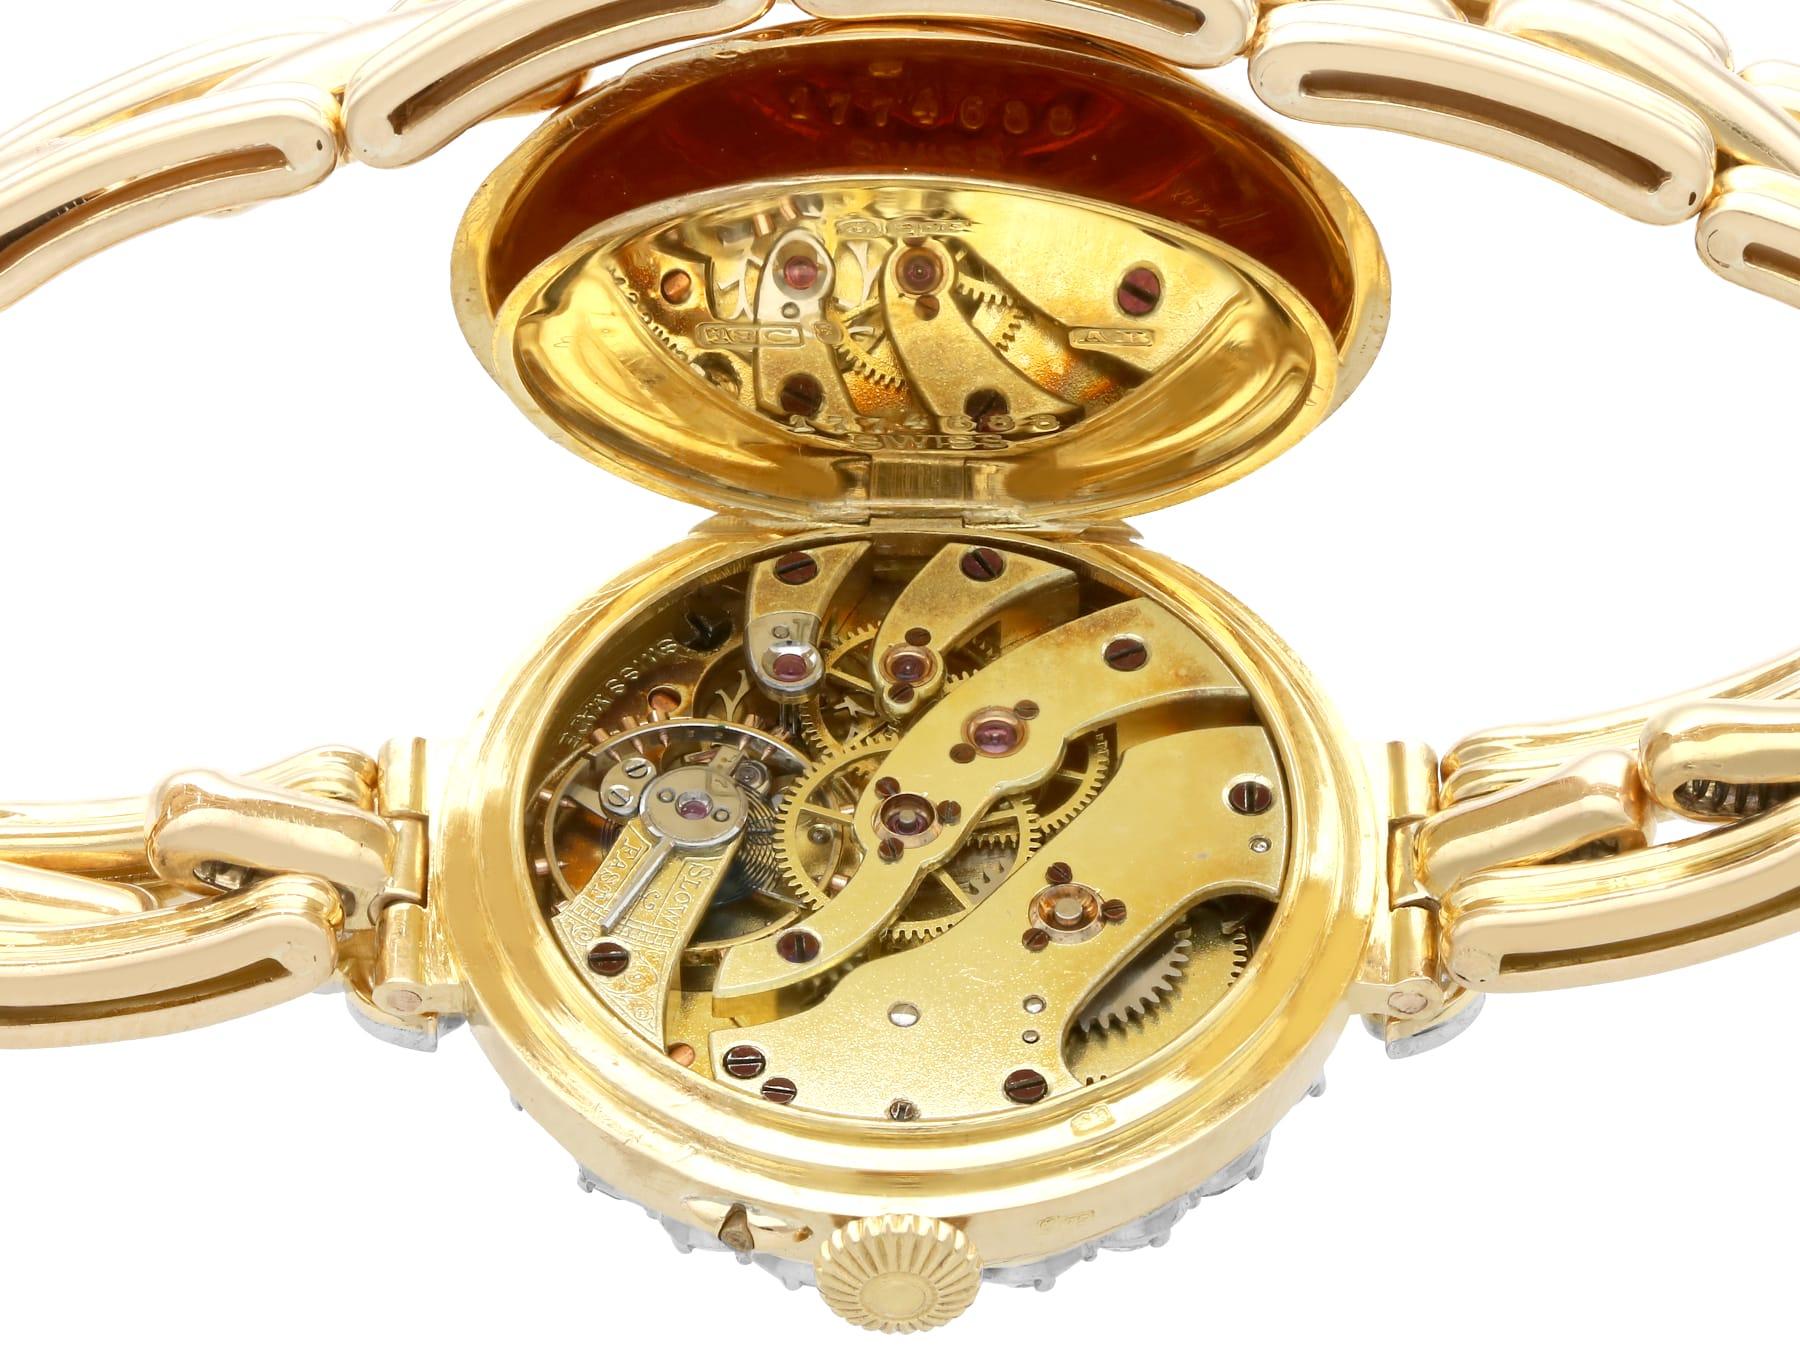 Antique Edwardian 2.75Ct Diamond and 18k Yellow Gold Cocktail Watch 1909 For Sale 5